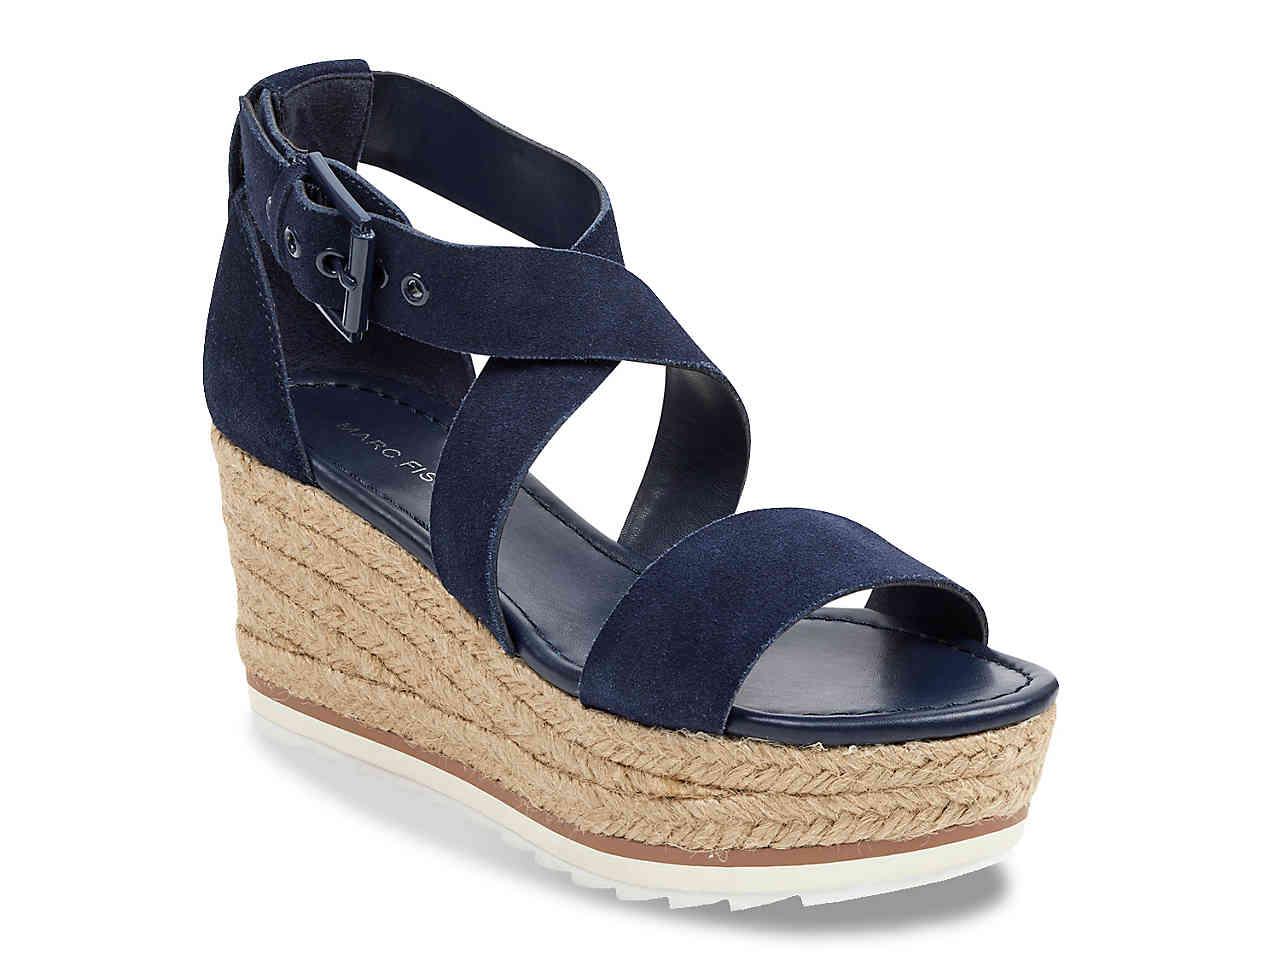 Marc Fisher Zaide Espadrille Wedge Sandal in Blue Lyst